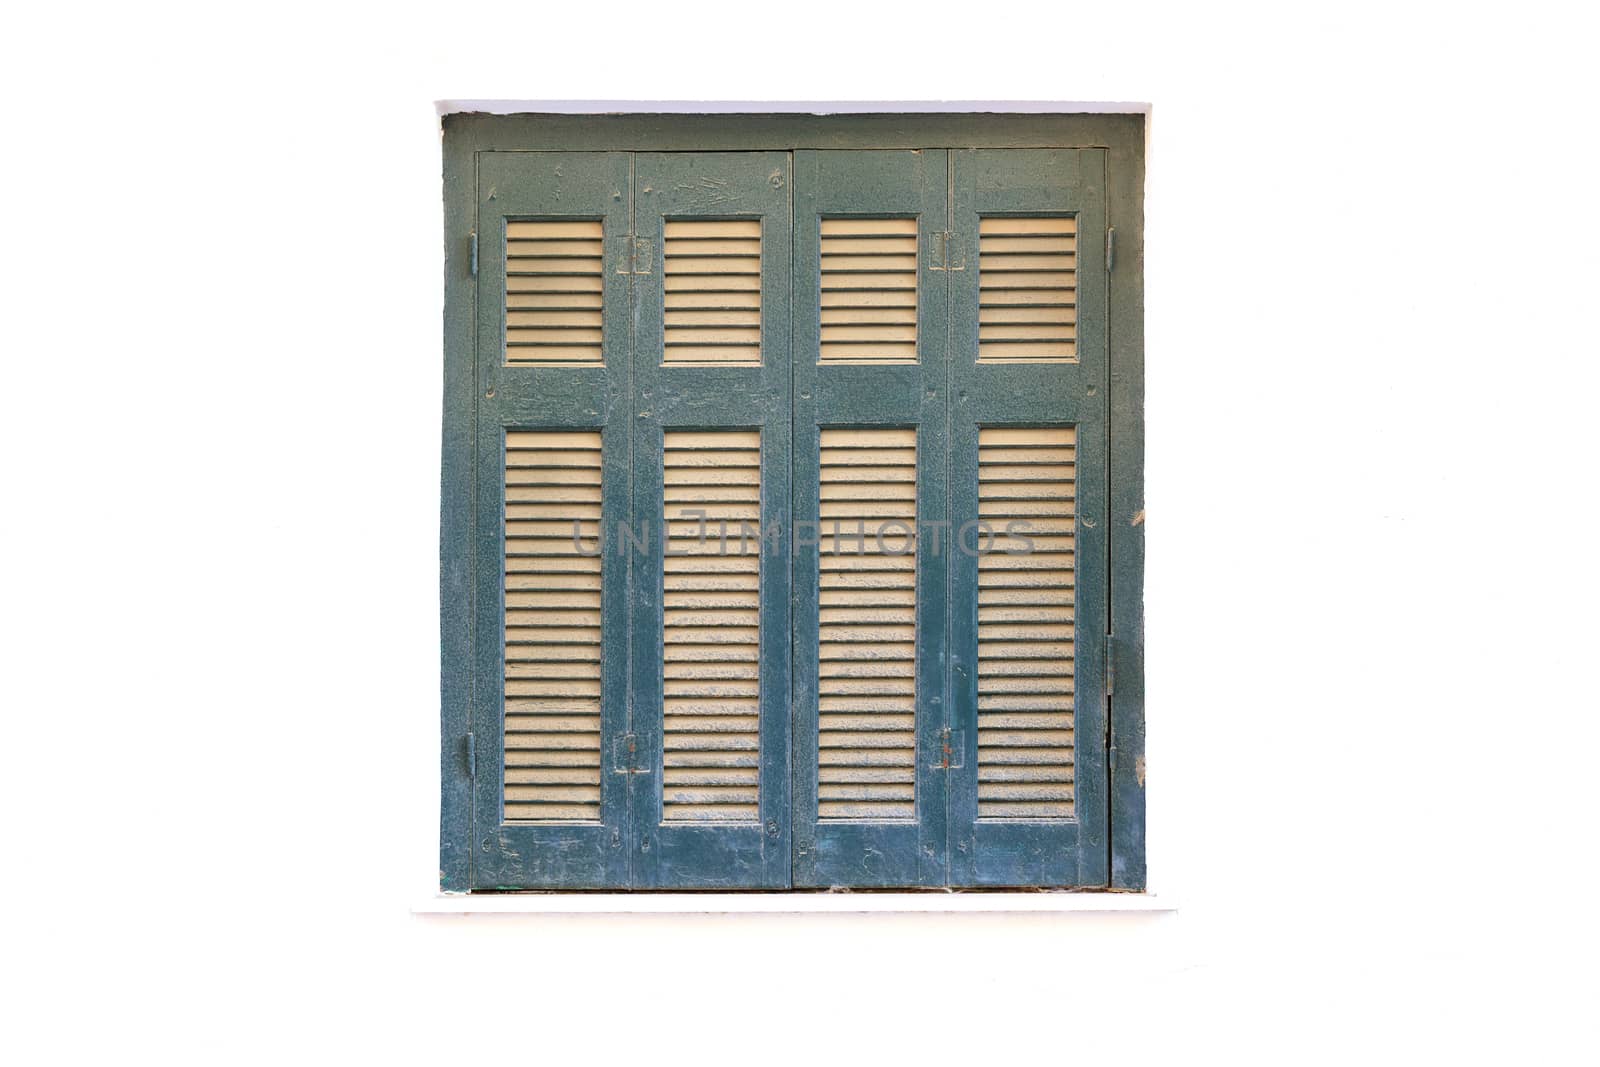 Light brown wooden shutters on an old green window against the background of a white facade of the house.